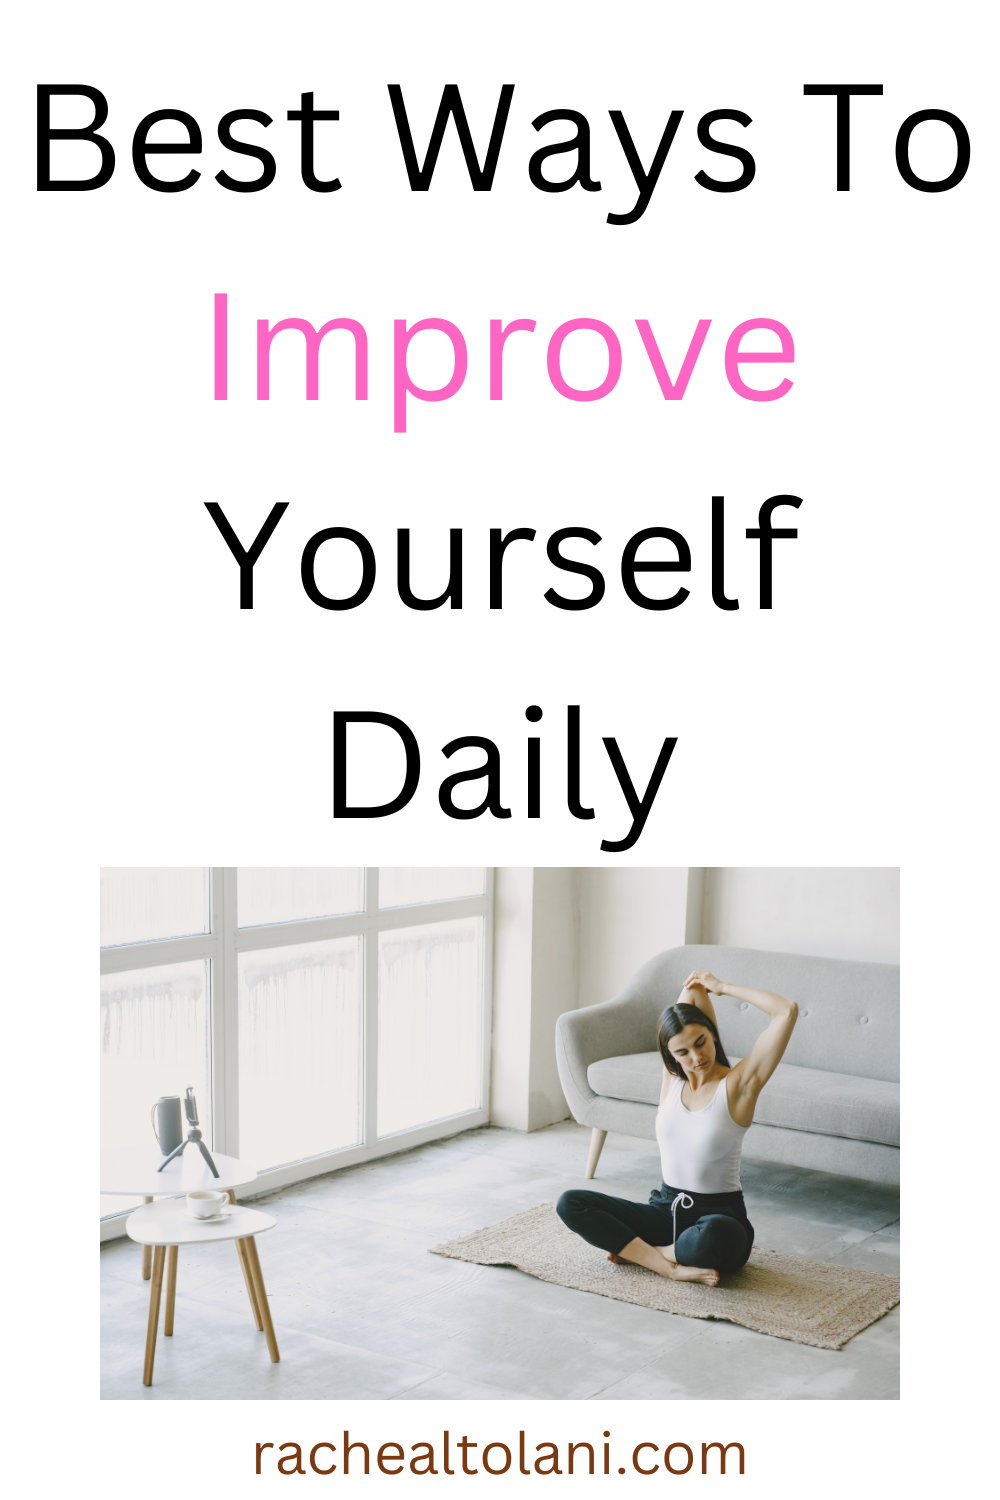 How to improve yourself every day